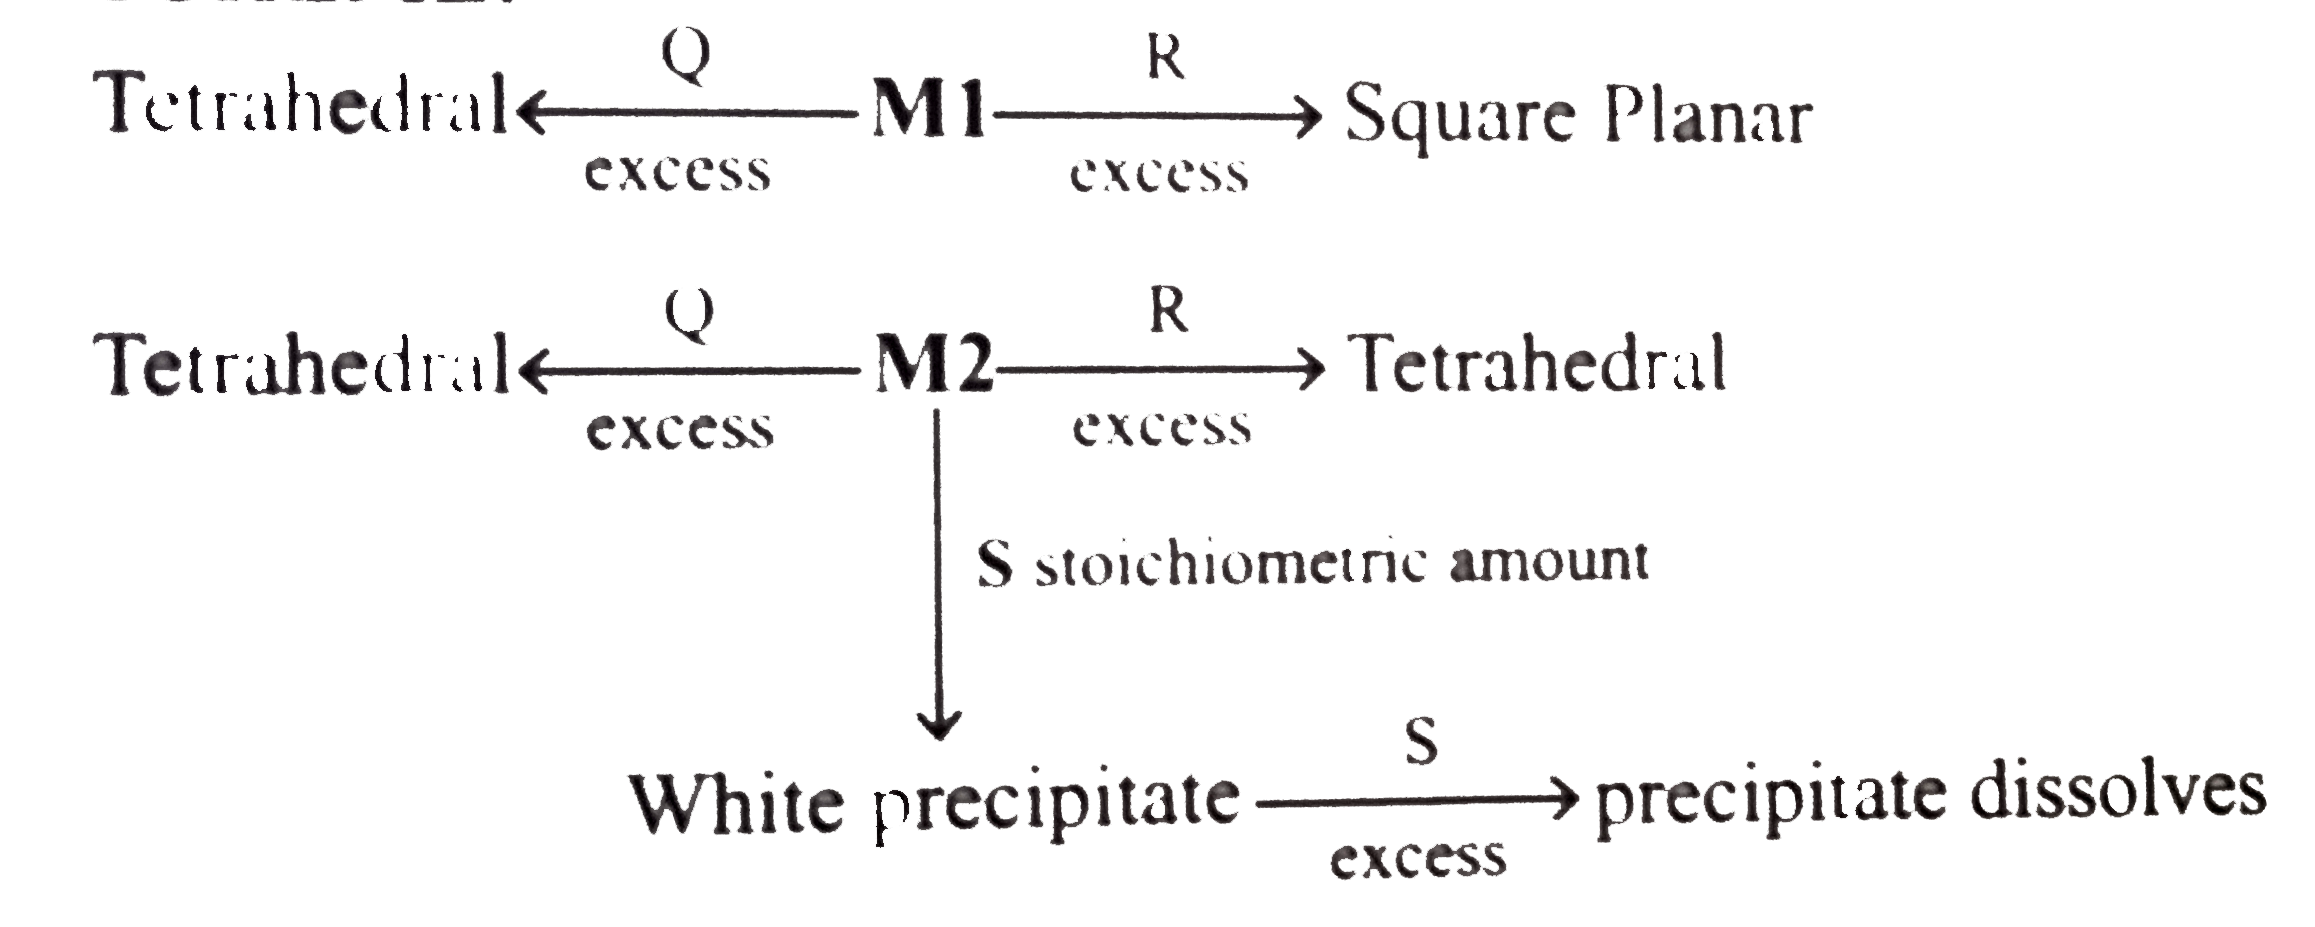 An aqueous solution of metal ion MI reacts separately with reagents Q and R in excess to give tetrahedral and square planar complexes, respectively An aqueous solution of another metal ion M2 always forms tetrahedral complexs with theses reagents. Aqueous solution of M2 on reaction with reagent S gives white precipitate which dissolves in excess of S The reactions are summarised in the scheme given below:  SCHEME :   
  what is M2 and S??